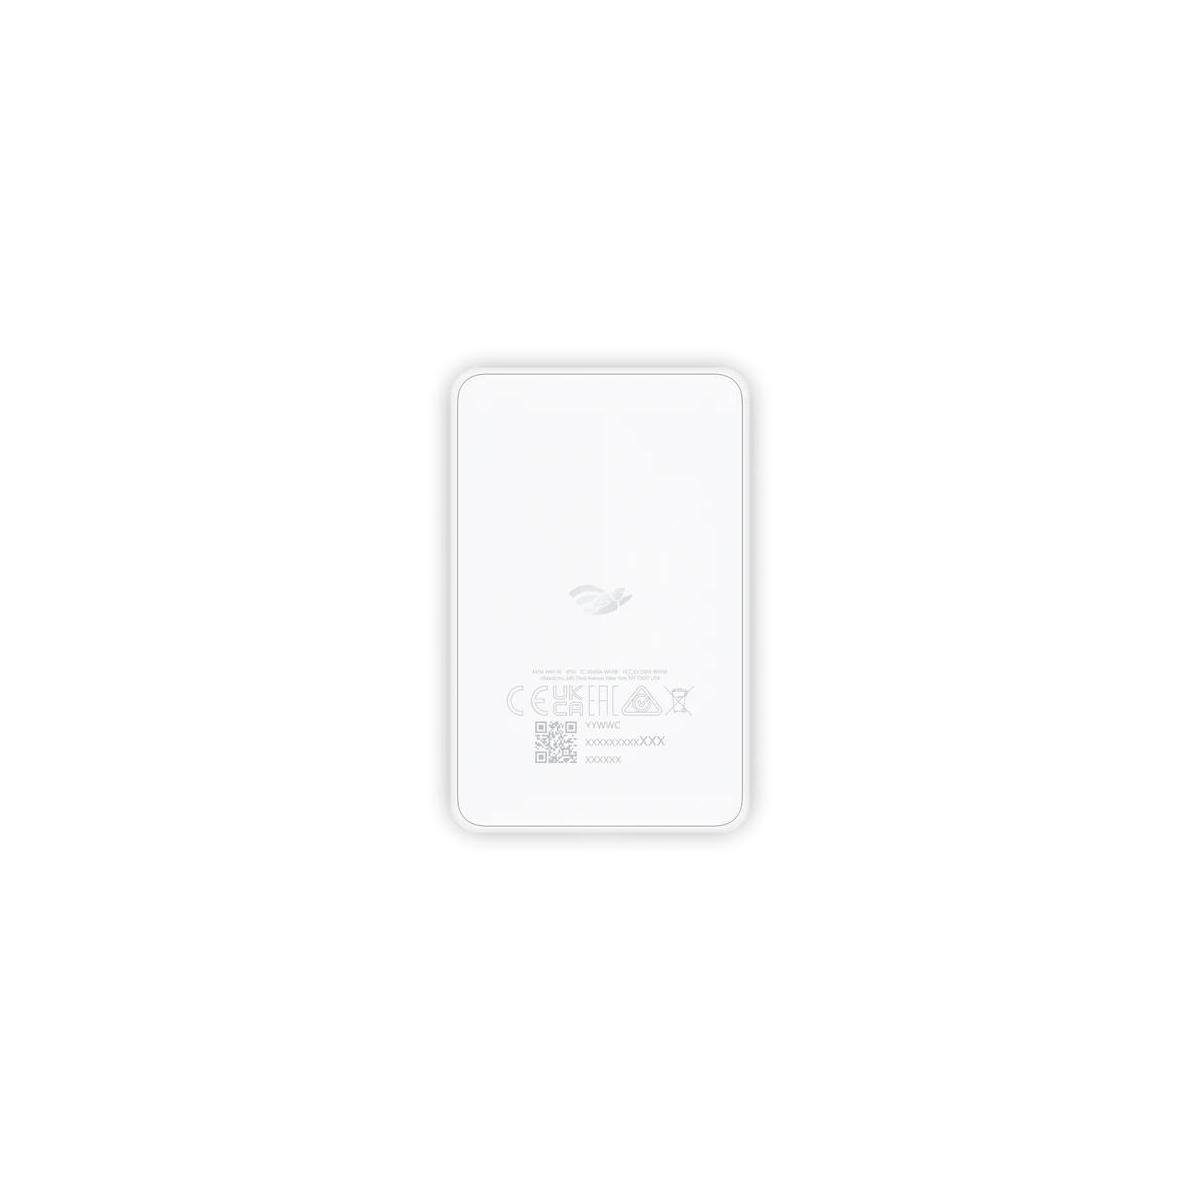 WLAN-Antenne Ubiquiti Networks WiFiMan-Assistent